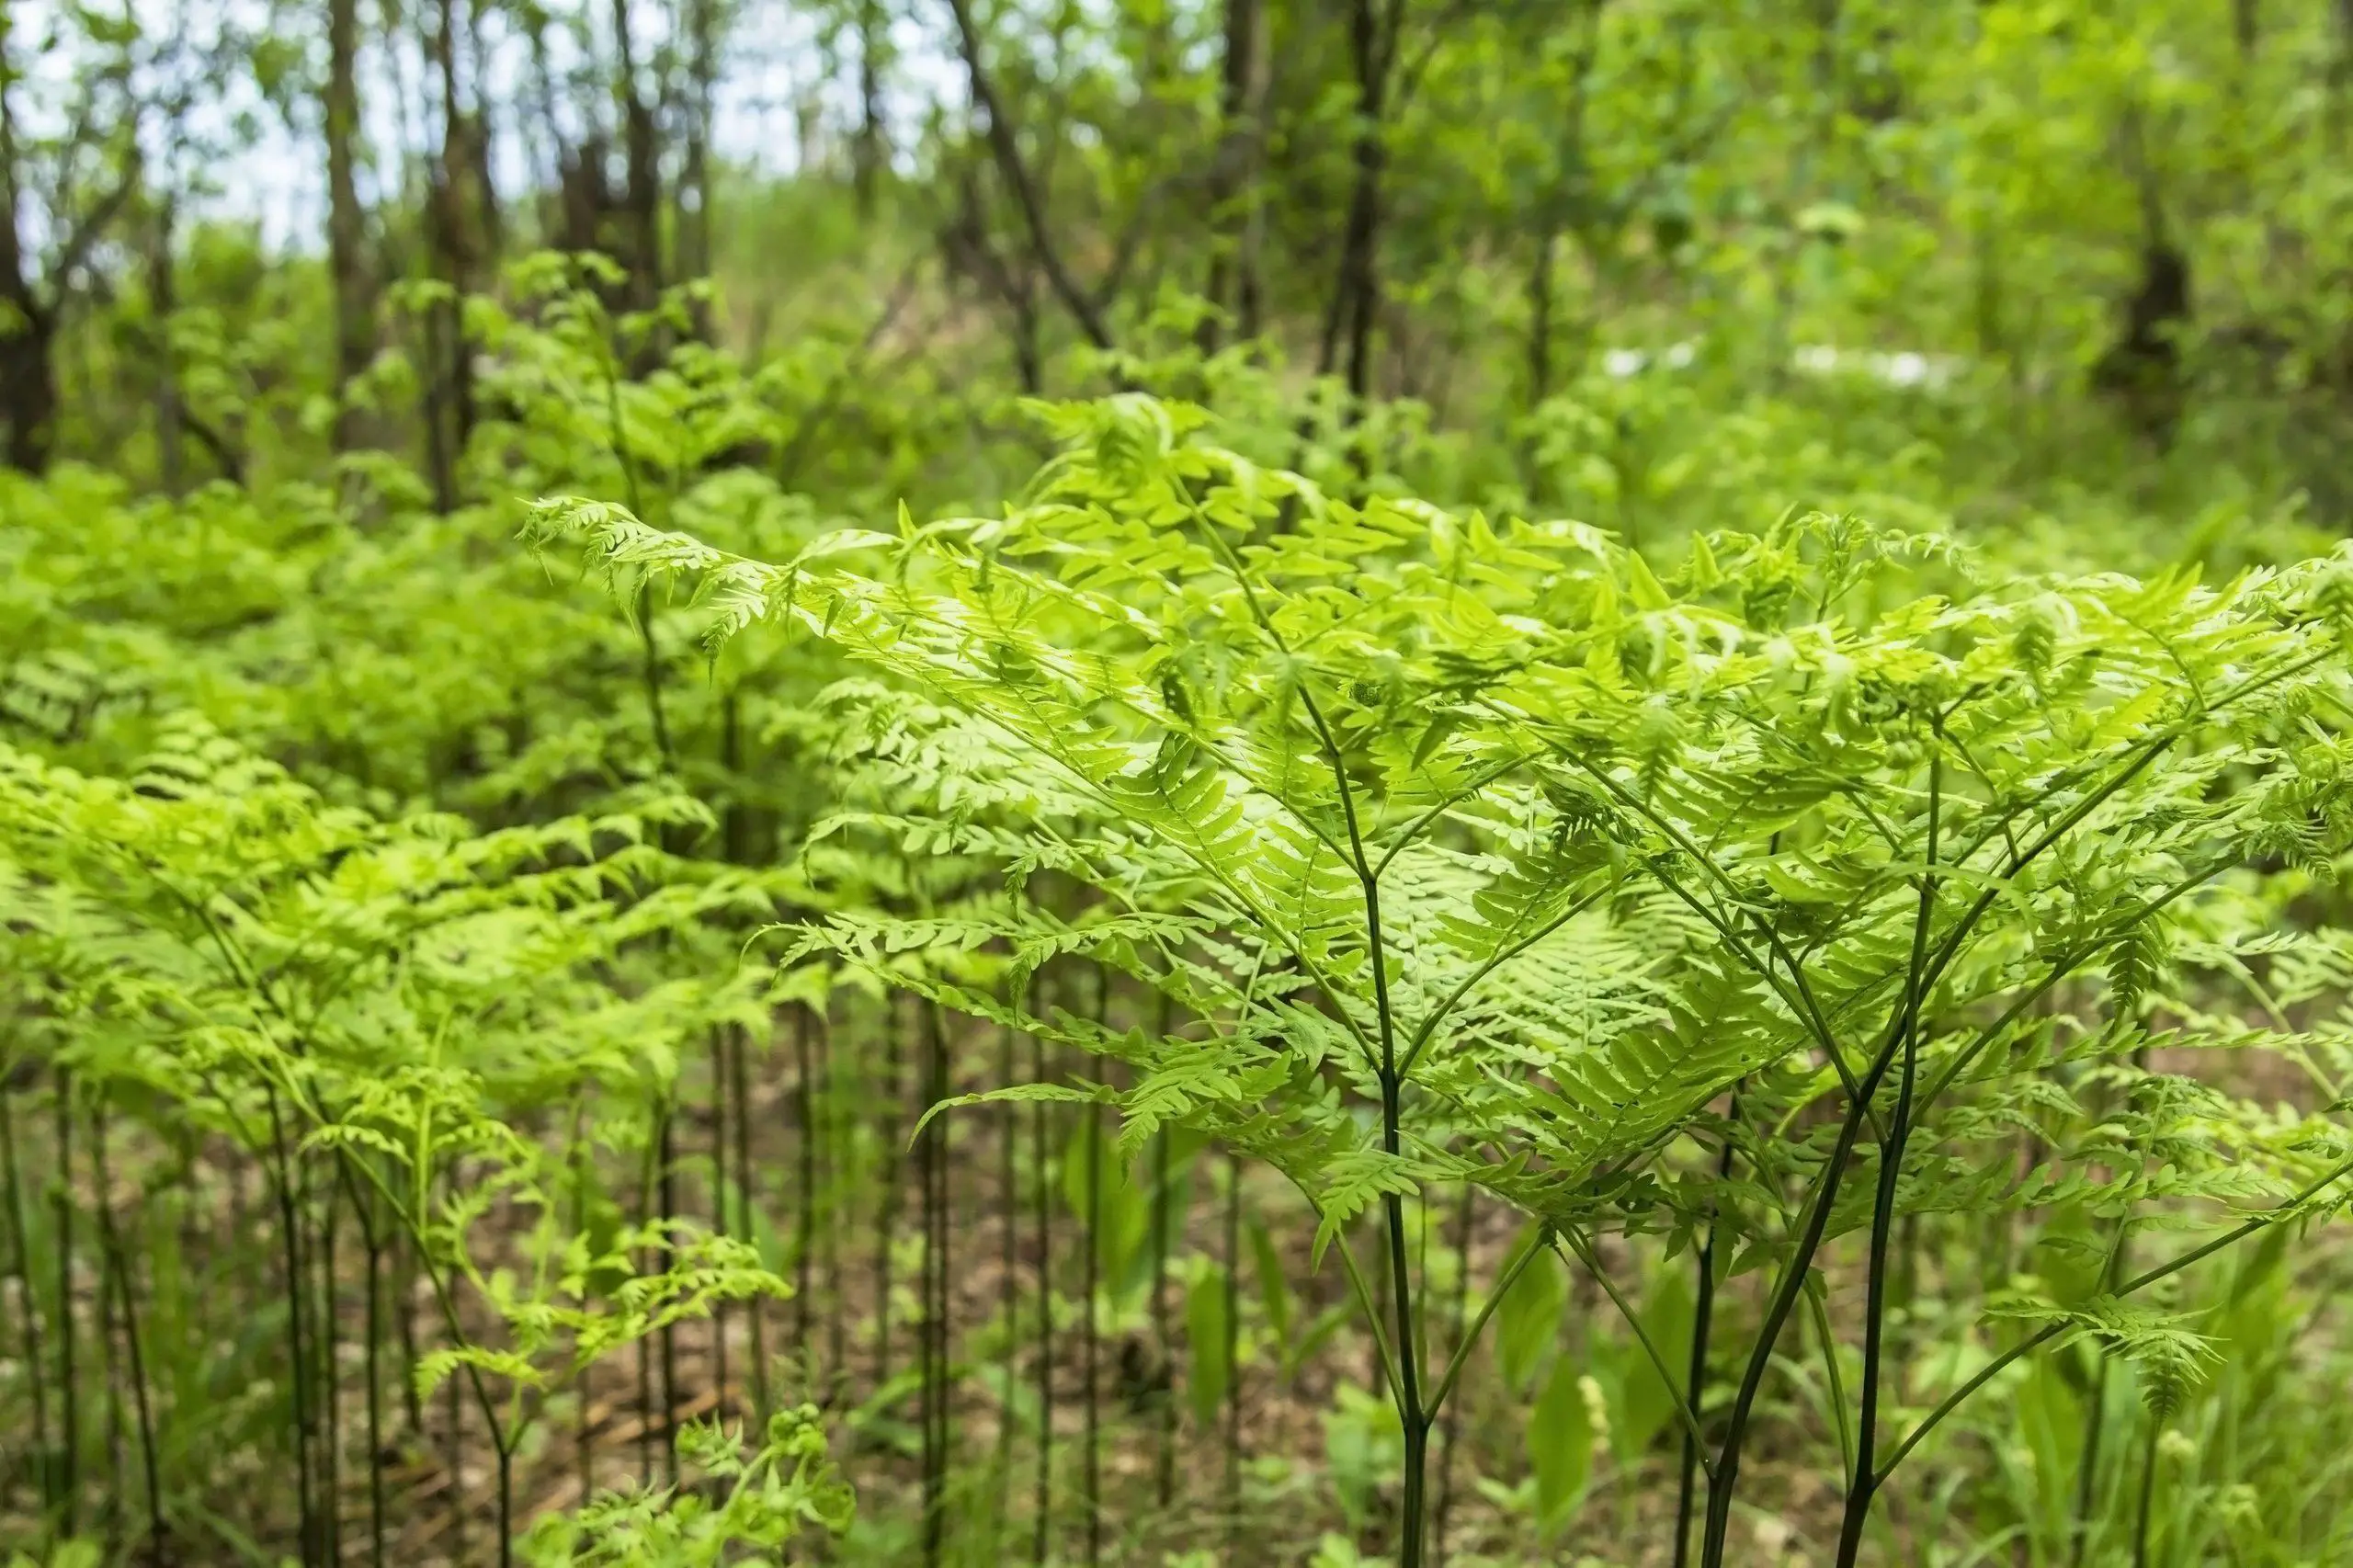 Ferns growing freely within a forest and providing clean air